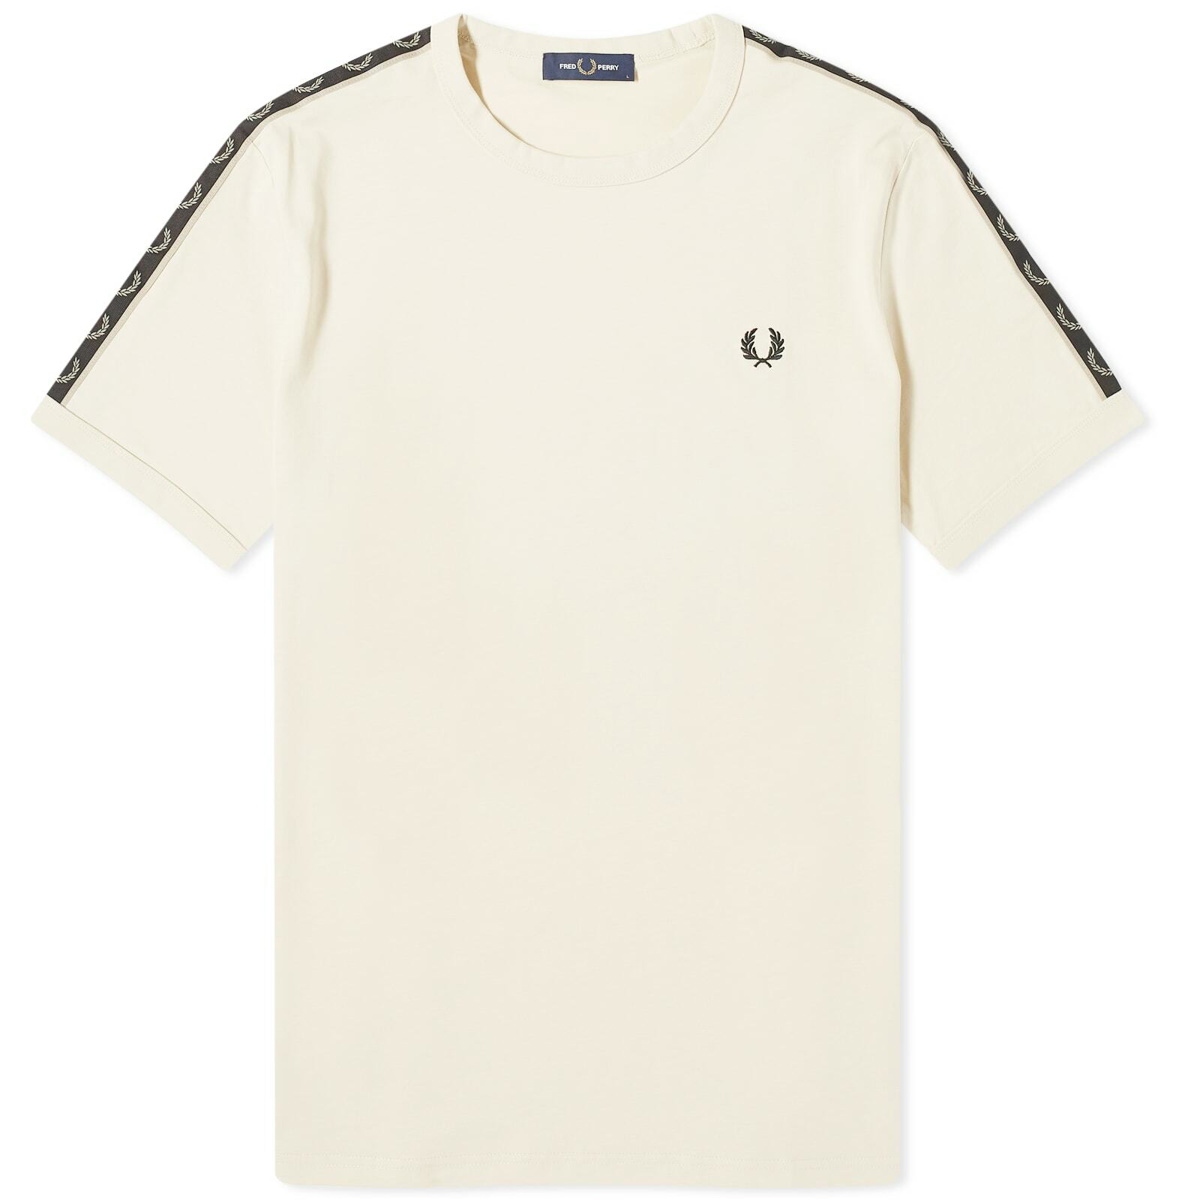 Photo: Fred Perry Men's Contrast Tape Ringer T-Shirt in Oatmeal/Warm Grey